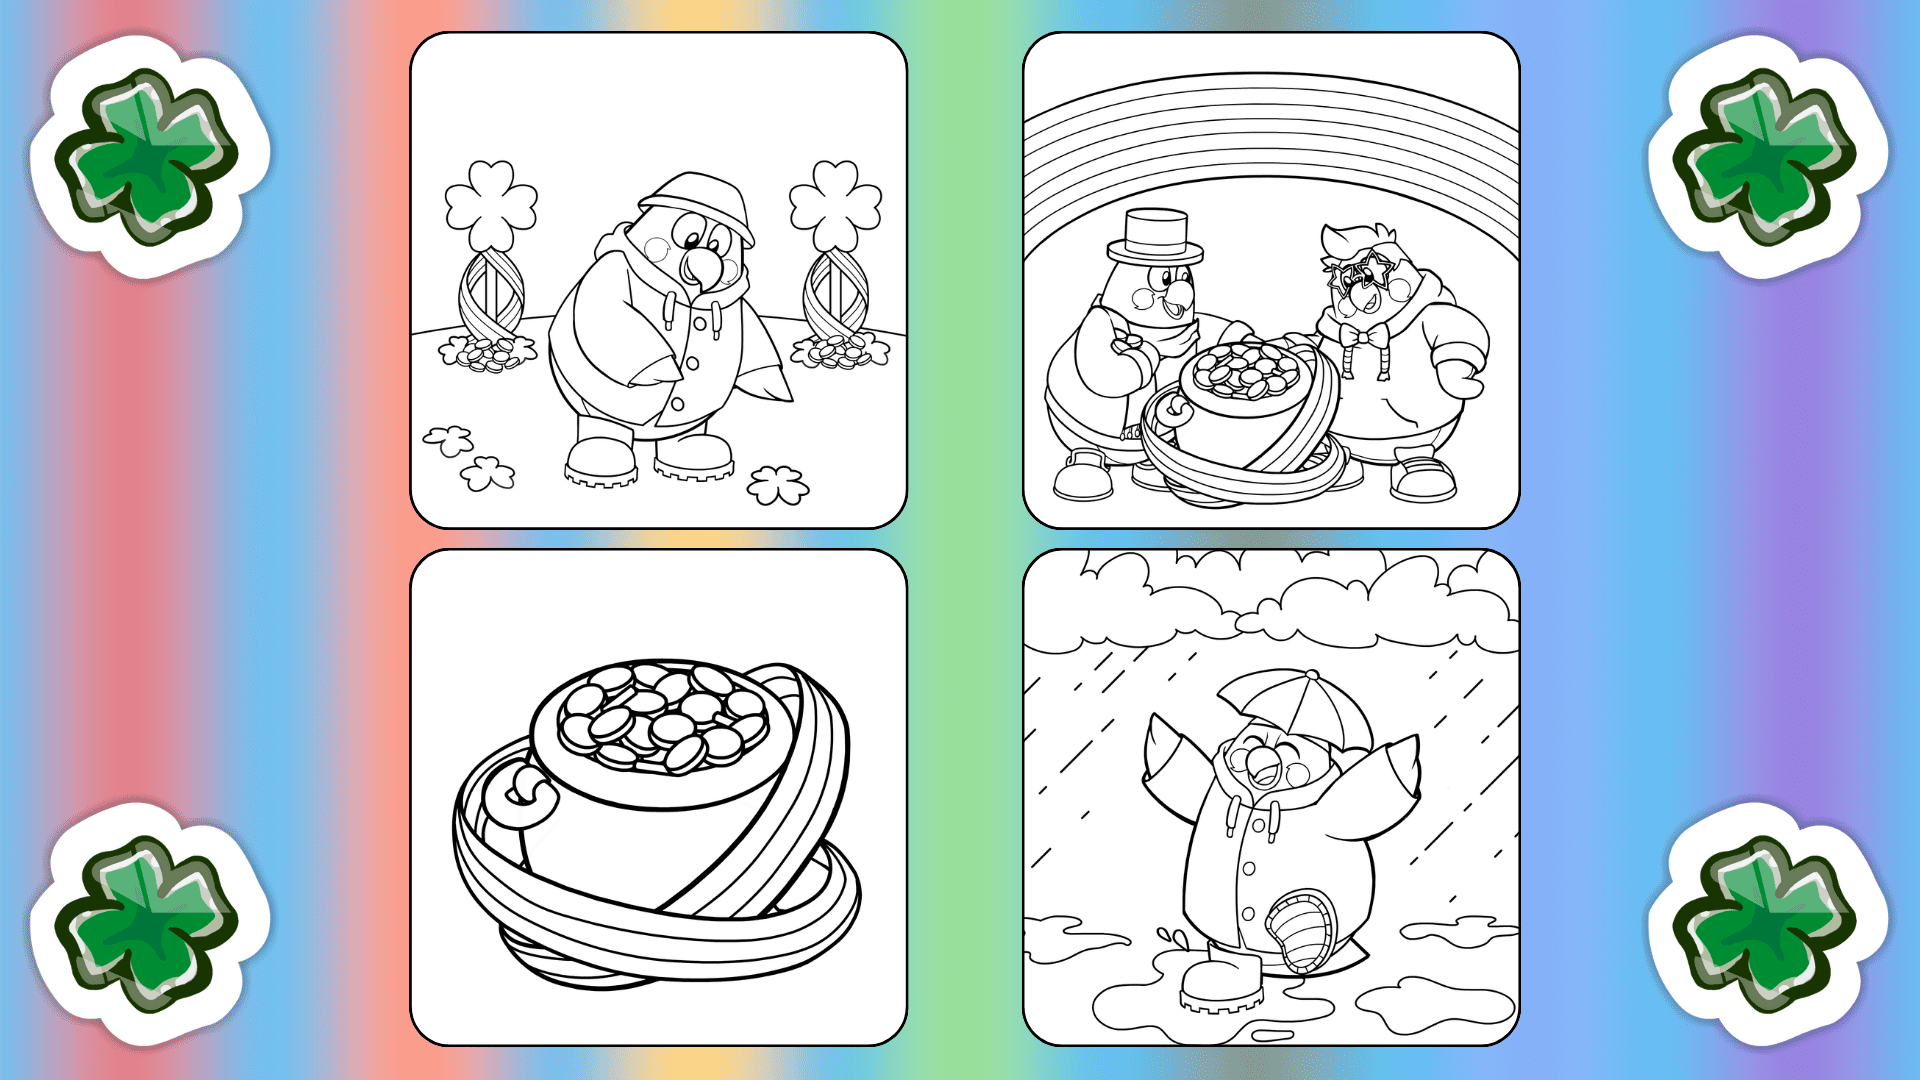 4 Free St. Patrick’s Day Coloring Pages for Kids